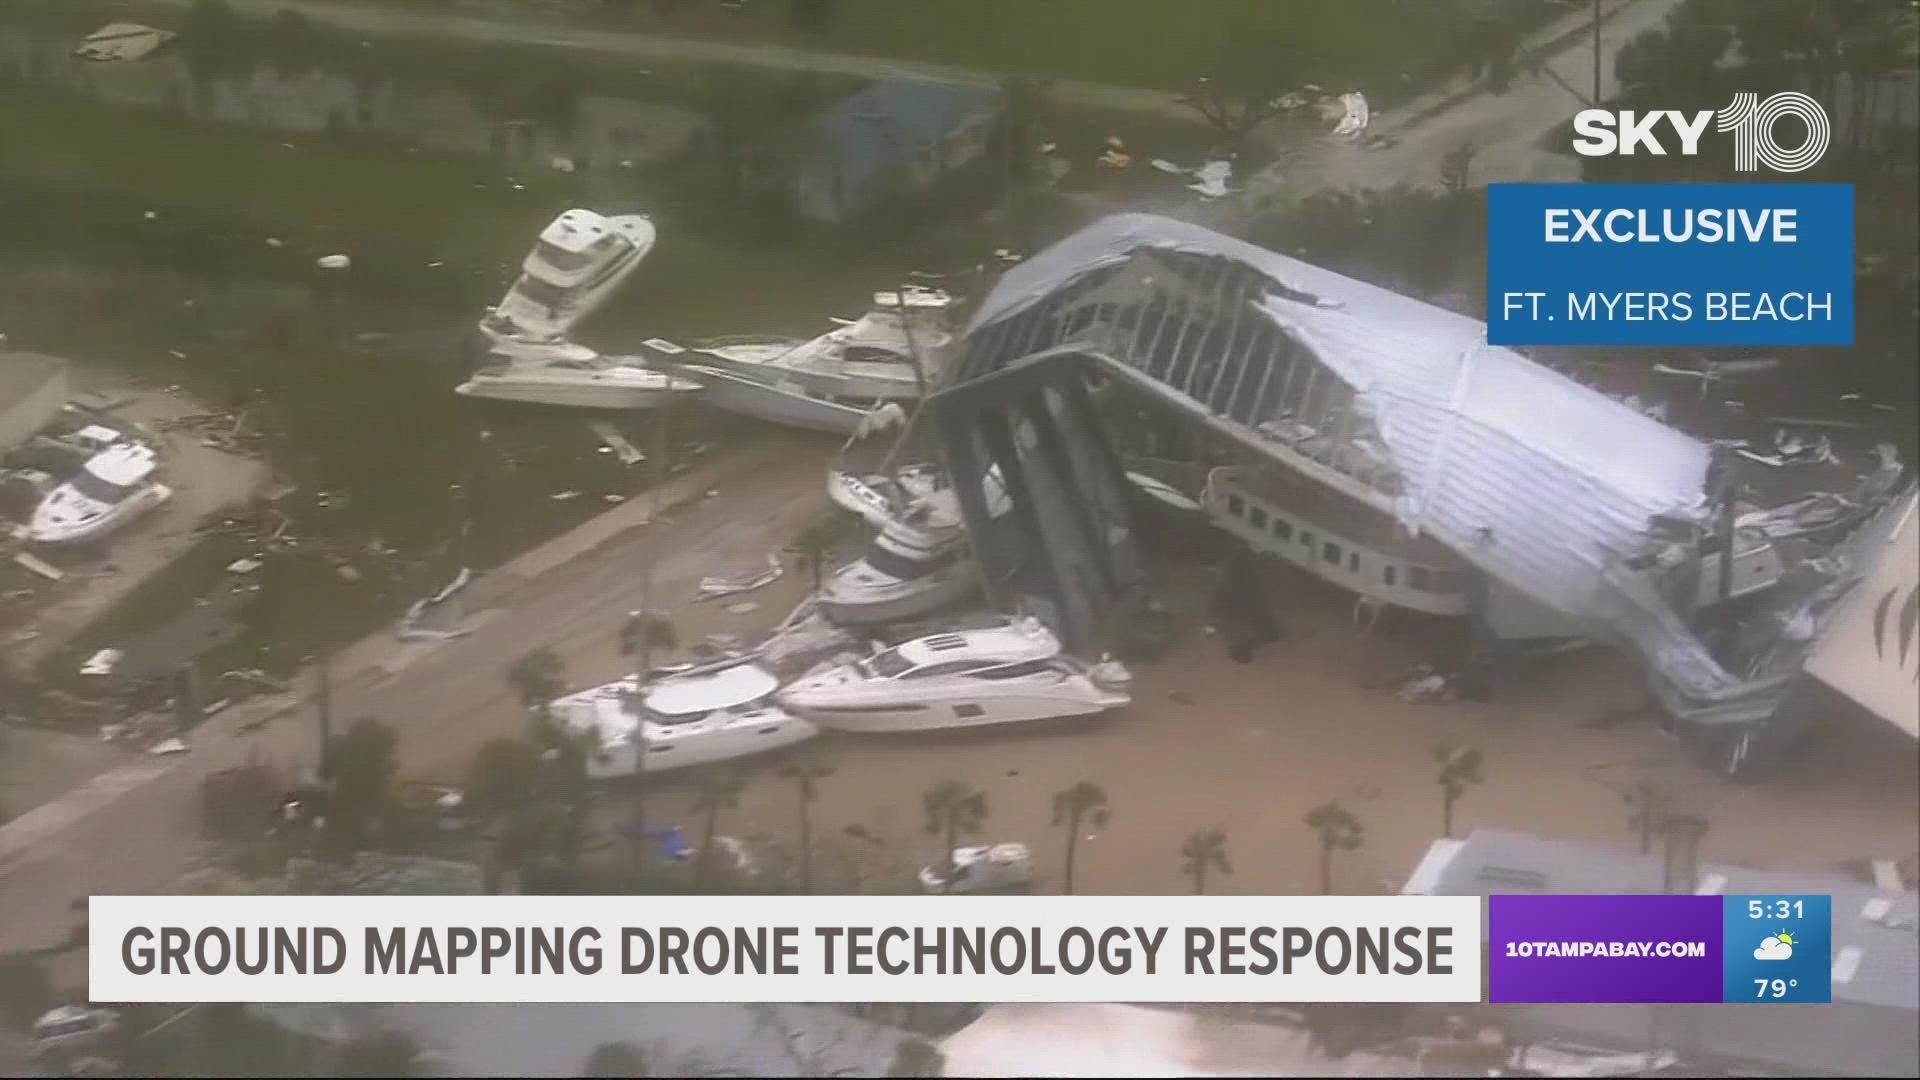 Before Hurricane Ian made landfall, drones were used to map out the area and model buildings and street locations to provide pre-storm images.